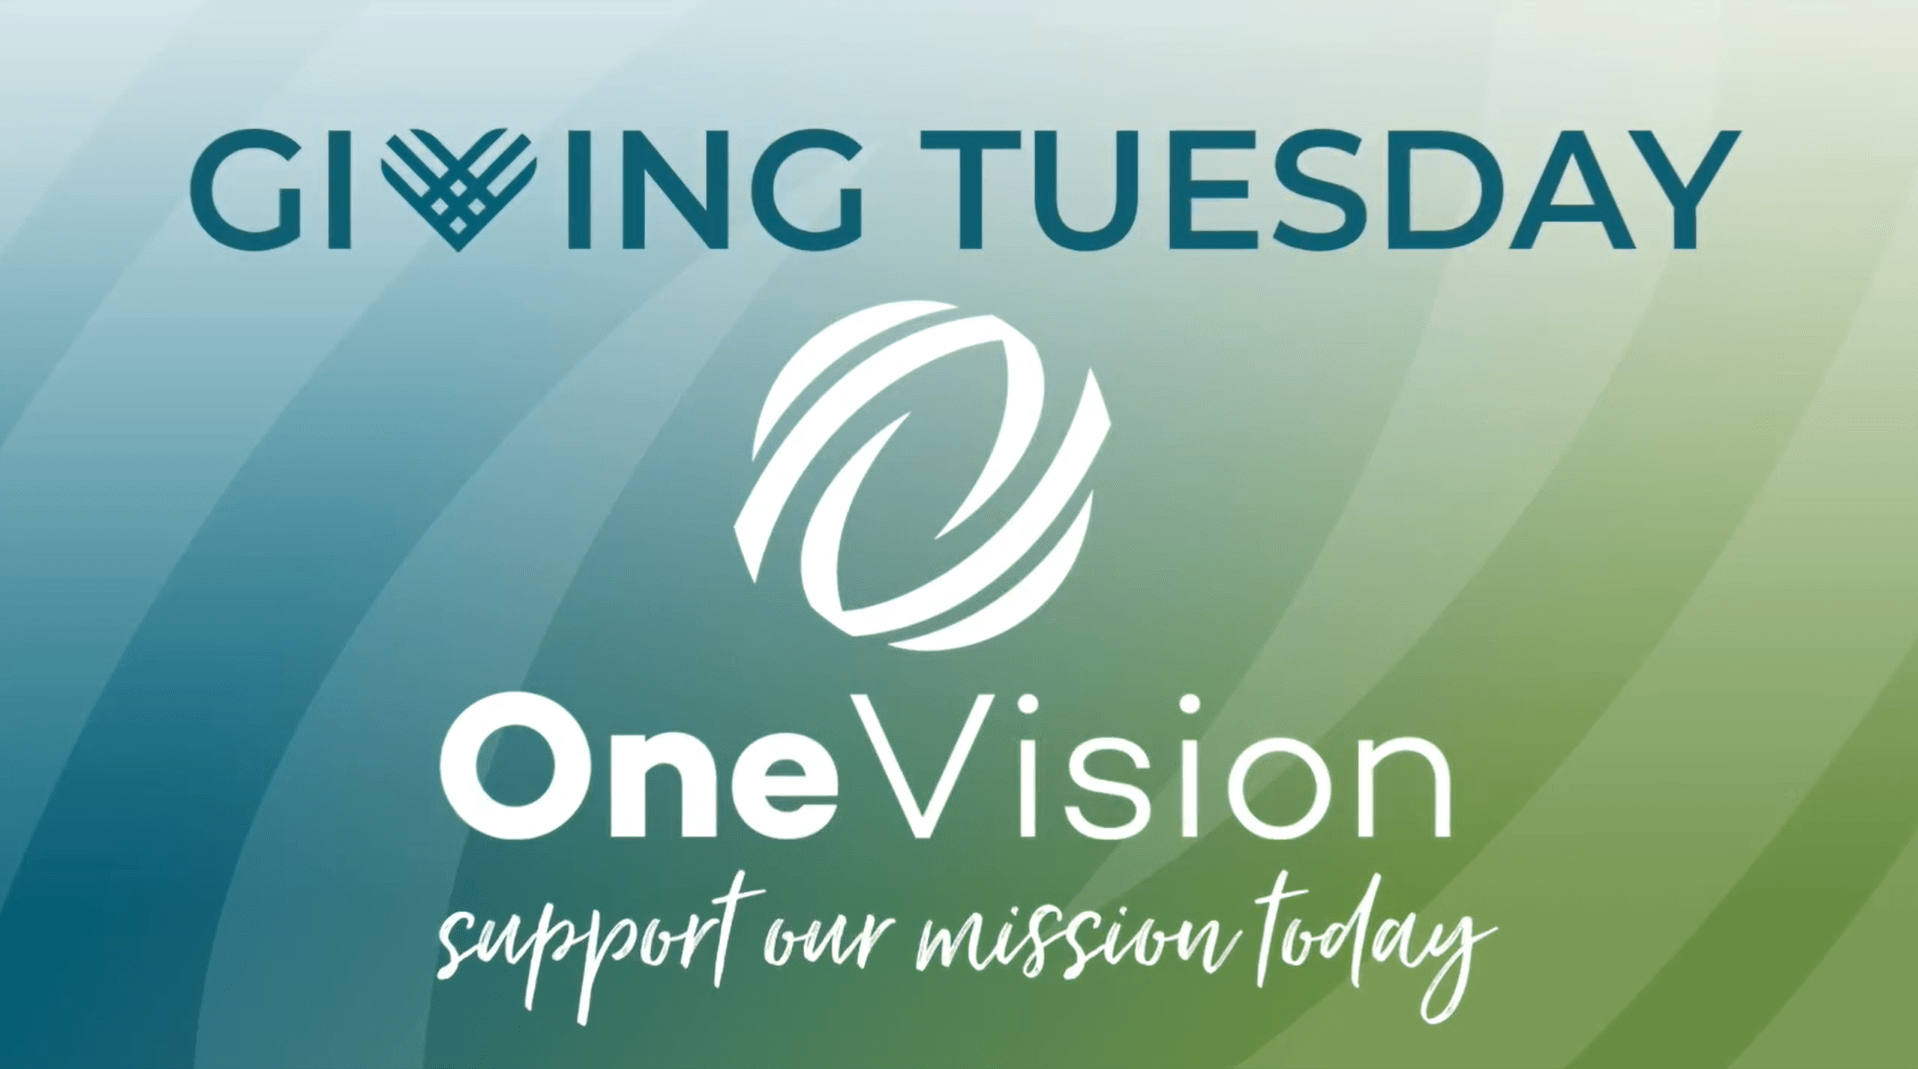 Make a difference in the lives of individuals with disabilities on #GivingTuesday